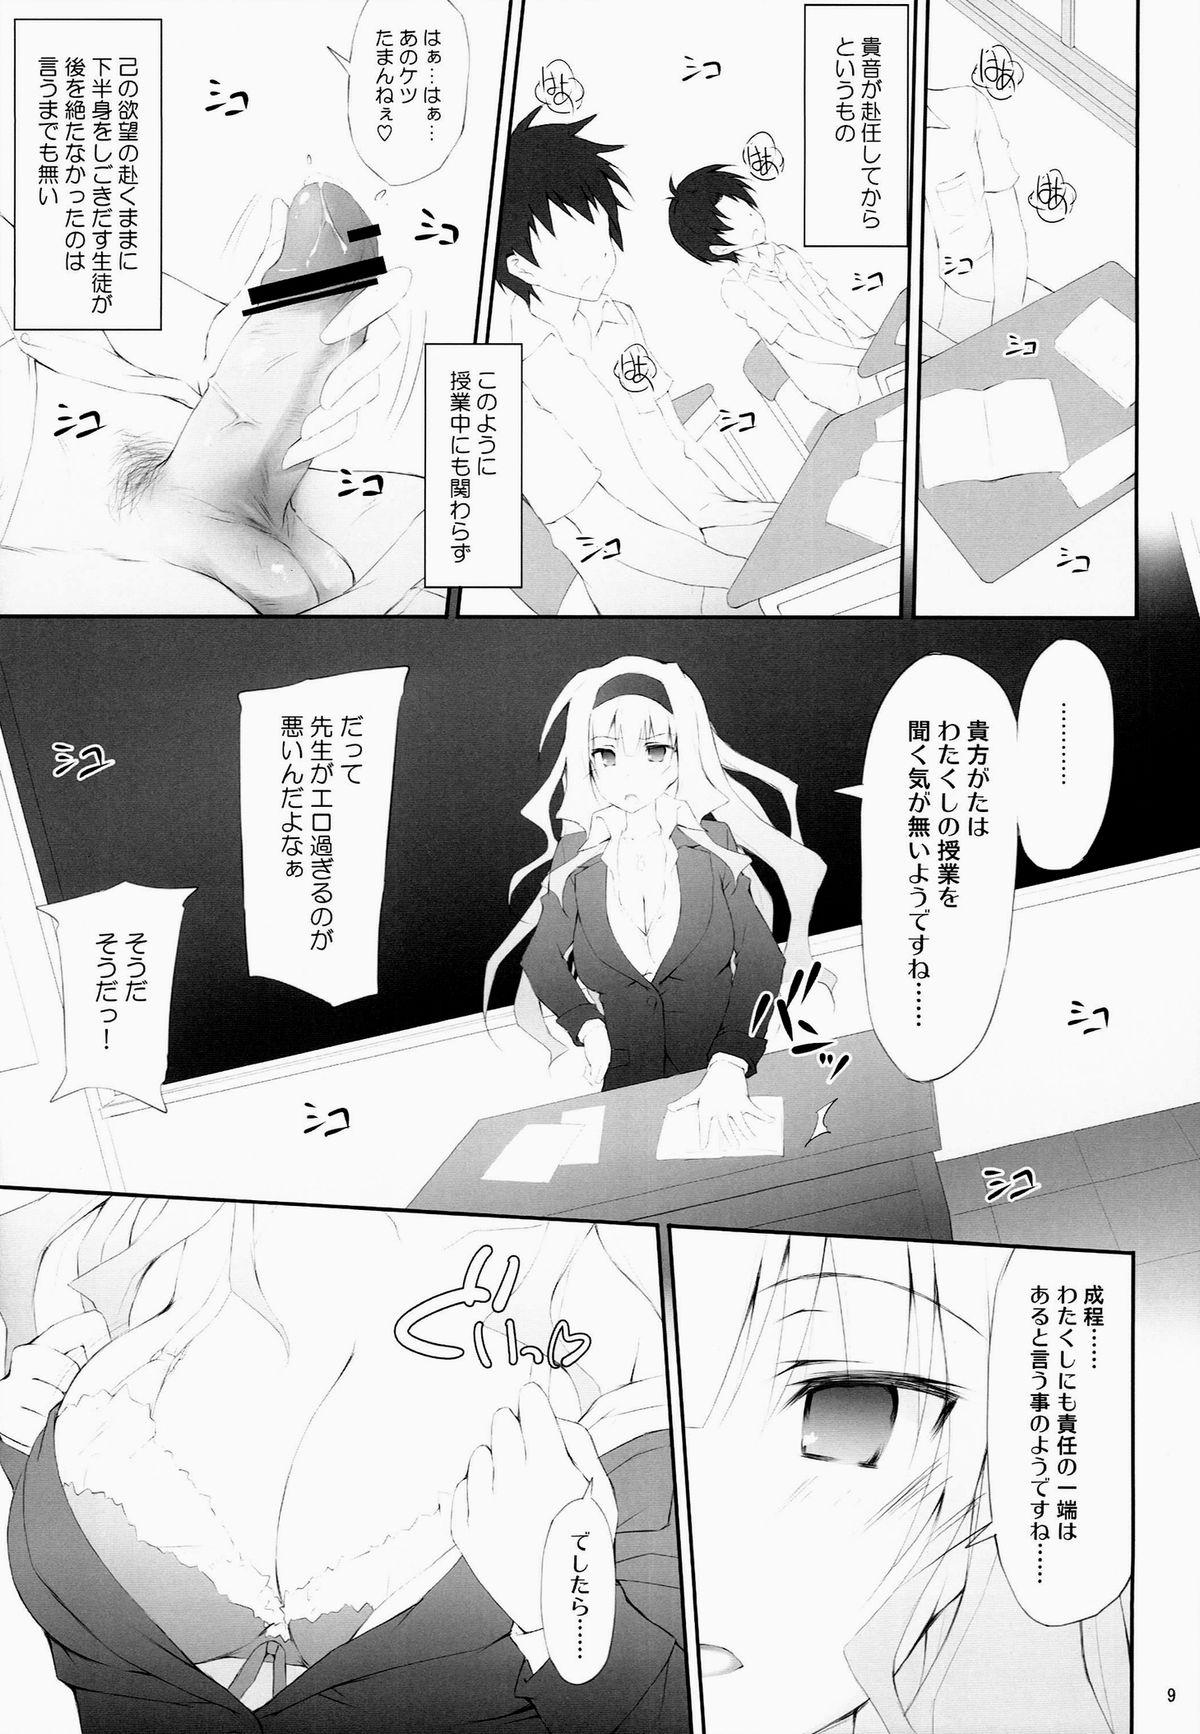 Spy Hot For Teacher - The idolmaster Parties - Page 8